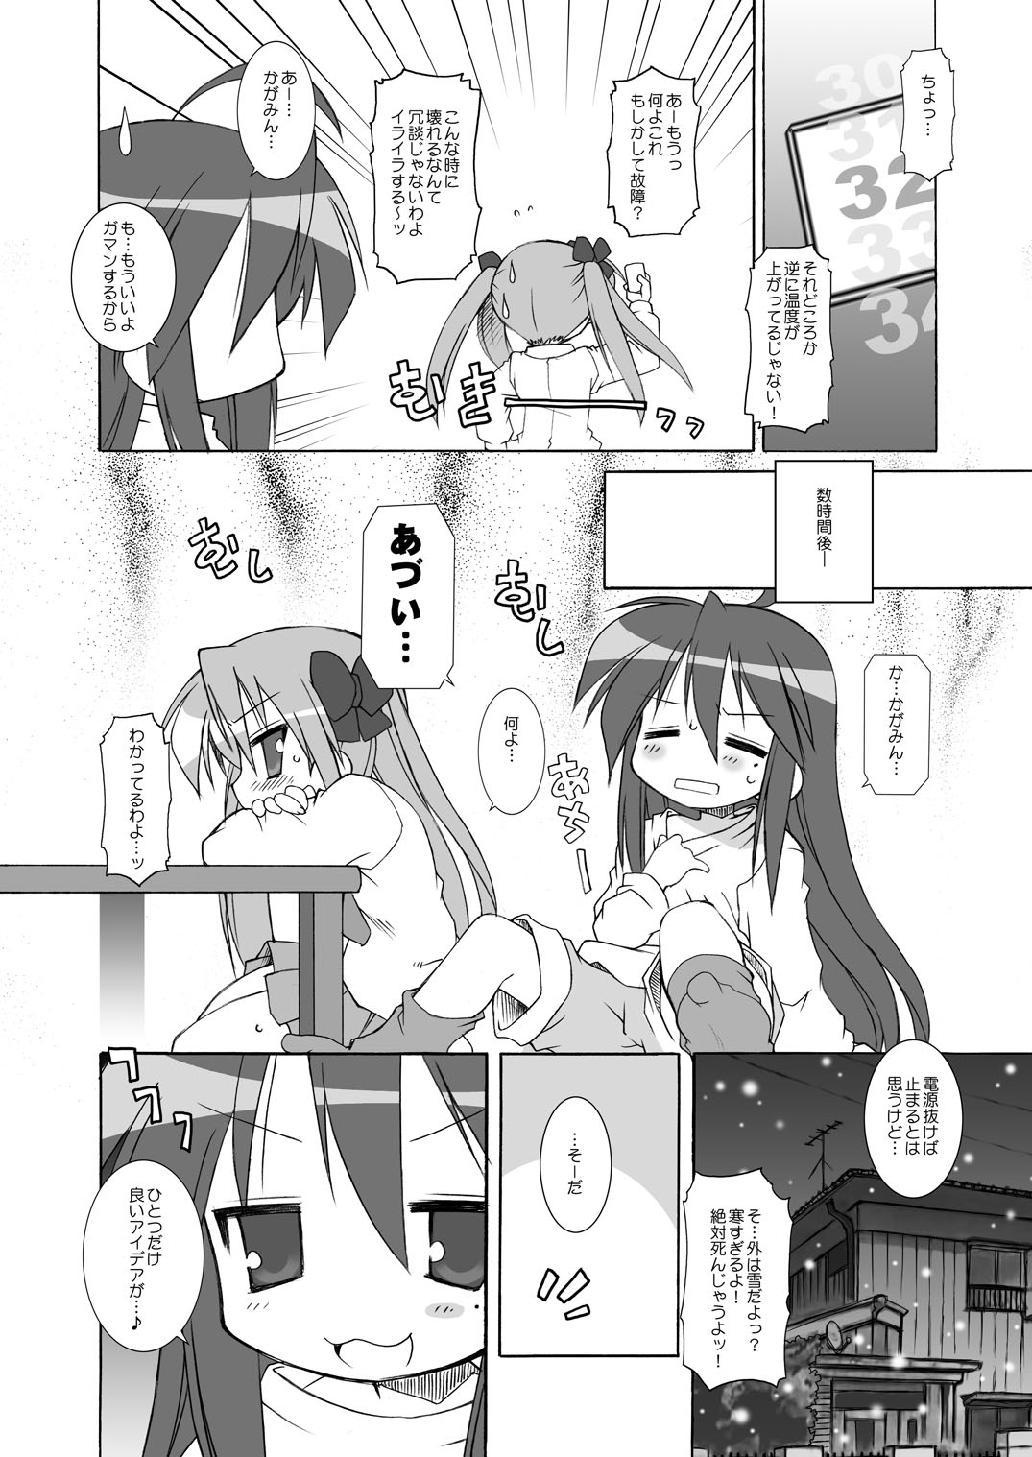 Gaypawn WINTER☆FEVER! - Lucky star Amazing - Page 8